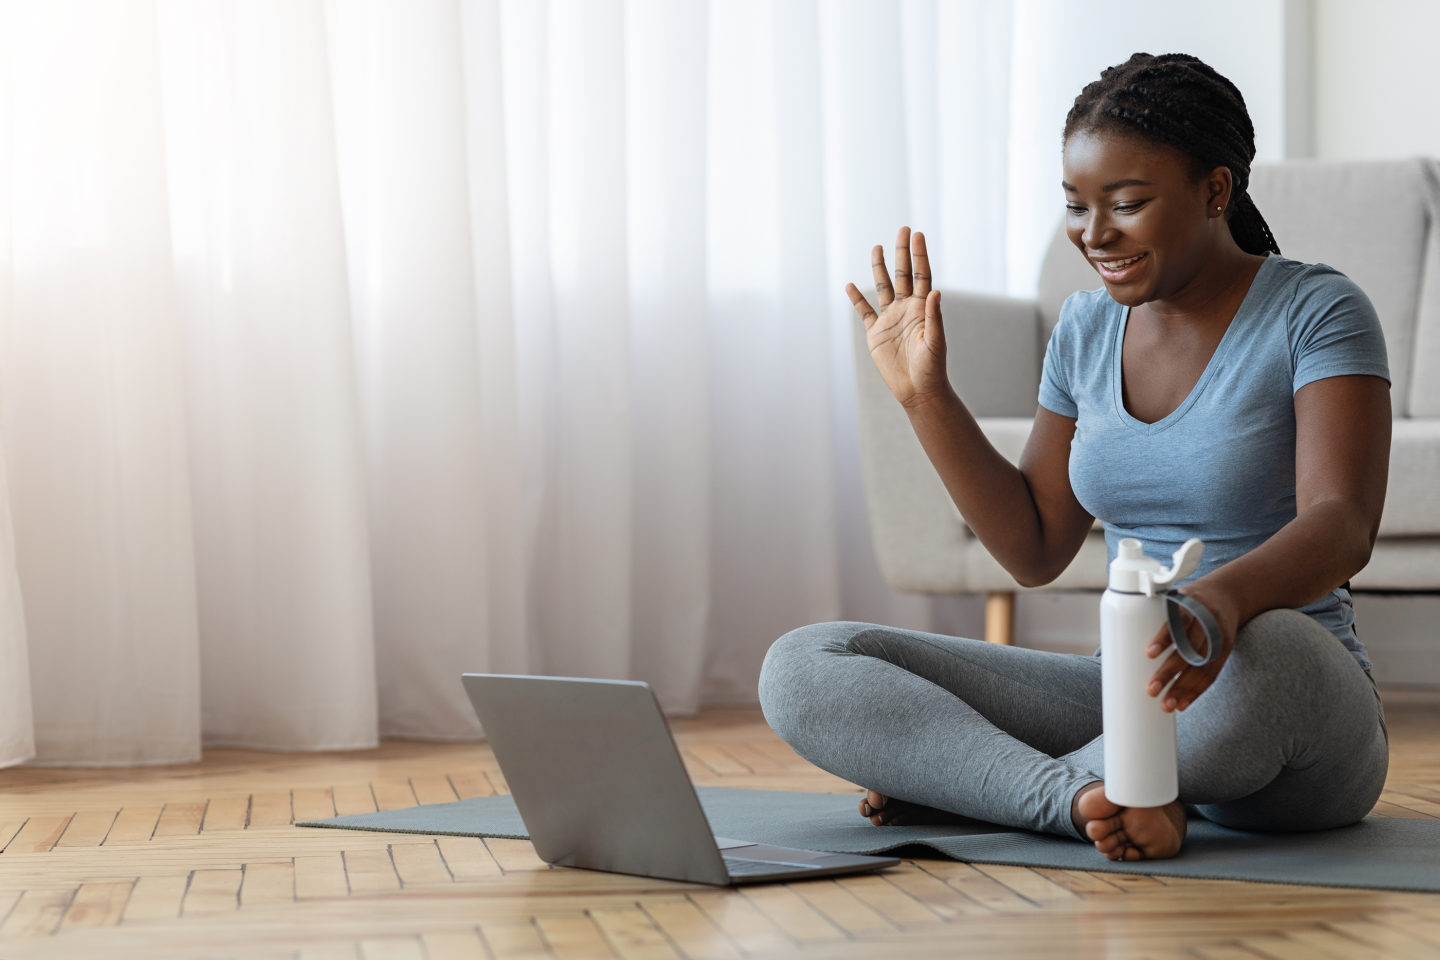 Smiling Black Woman In Sportswear Having Online Fitness Training With Laptop At Home, Waving Hand At Computer Webcam, Greeting Coach, Exercising On Yoga Mat In Living Room, Enjoying Healthy Lifestyle